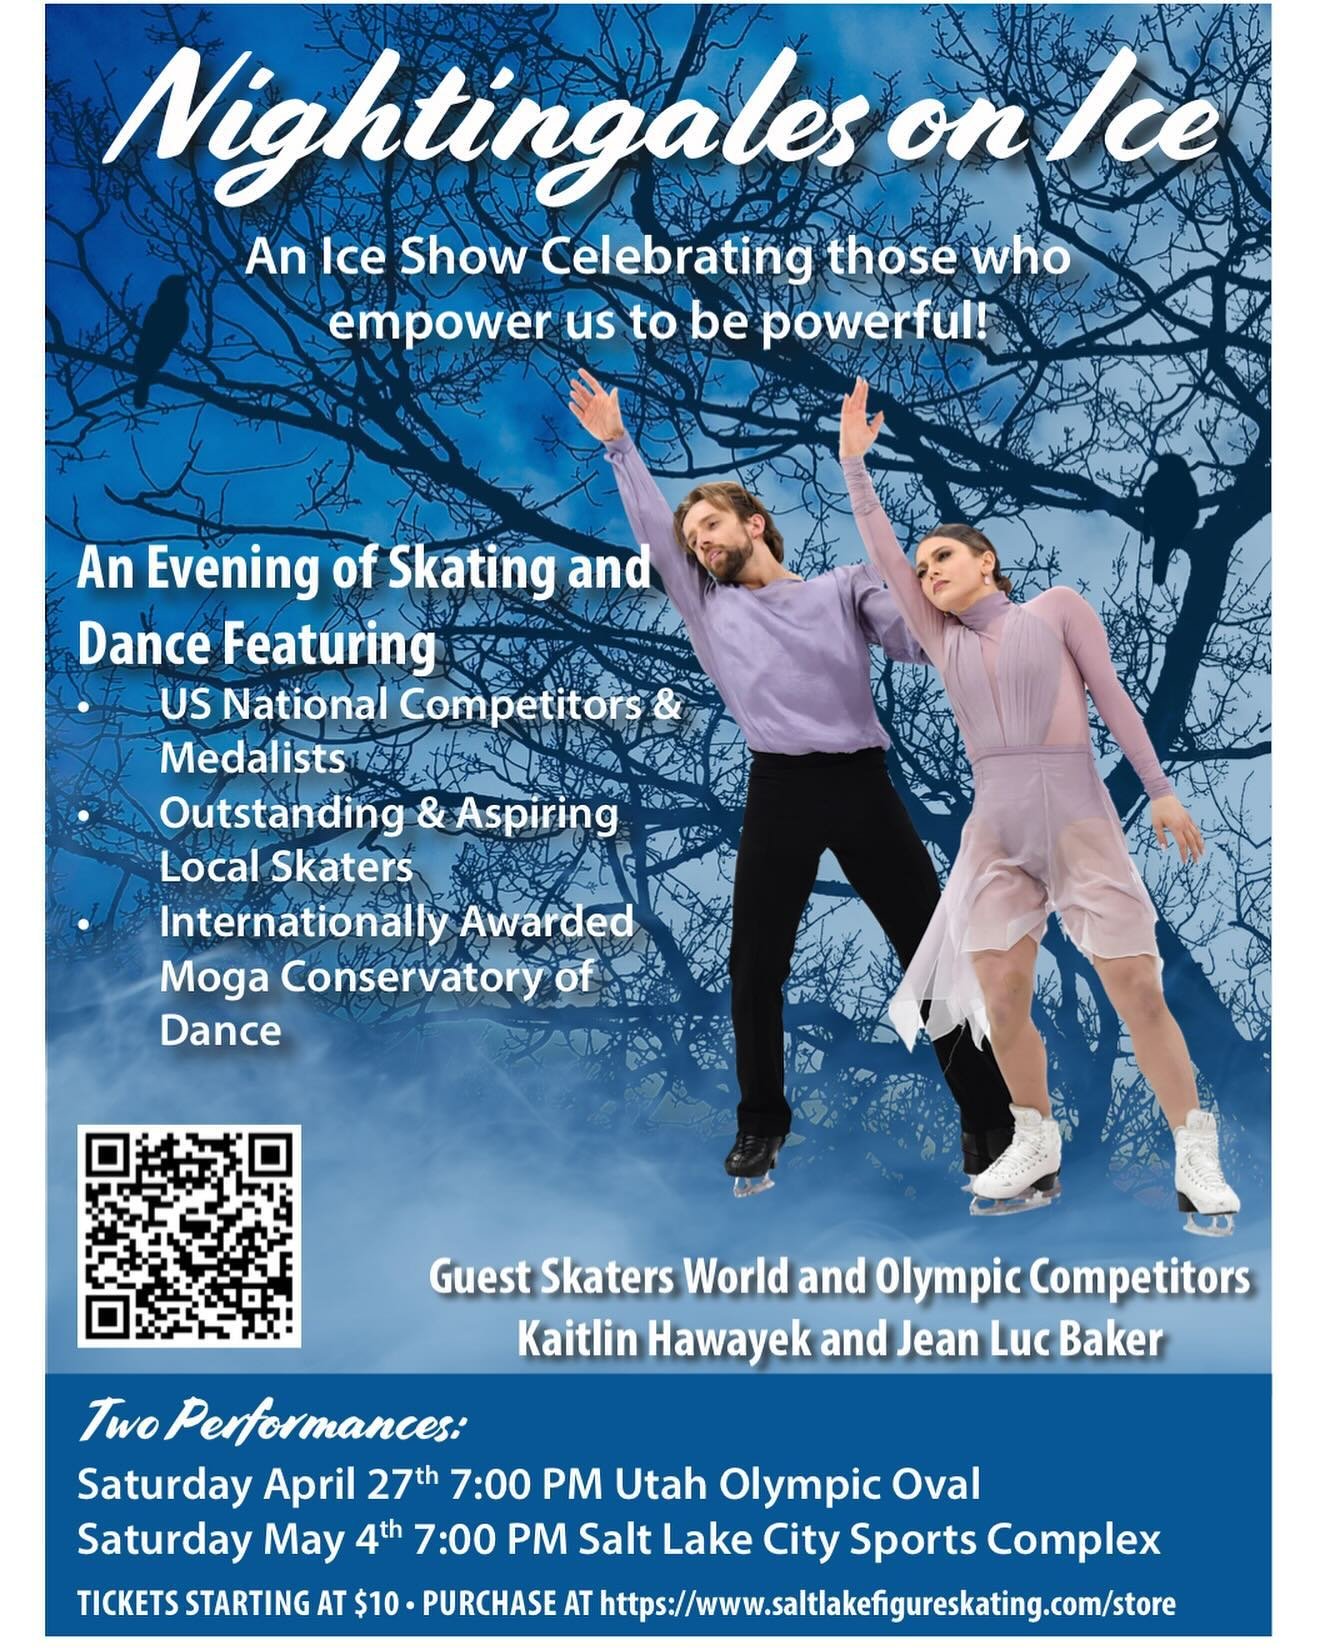 We are sooo excited that our first of two shows will be tomorrow, Sat April 27th at 7:00 pm at the Utah Olympic Oval. Come see these Olympic Ice dancers as well as many talented local skaters and dancers in an amazing evening of ice skates and dance!